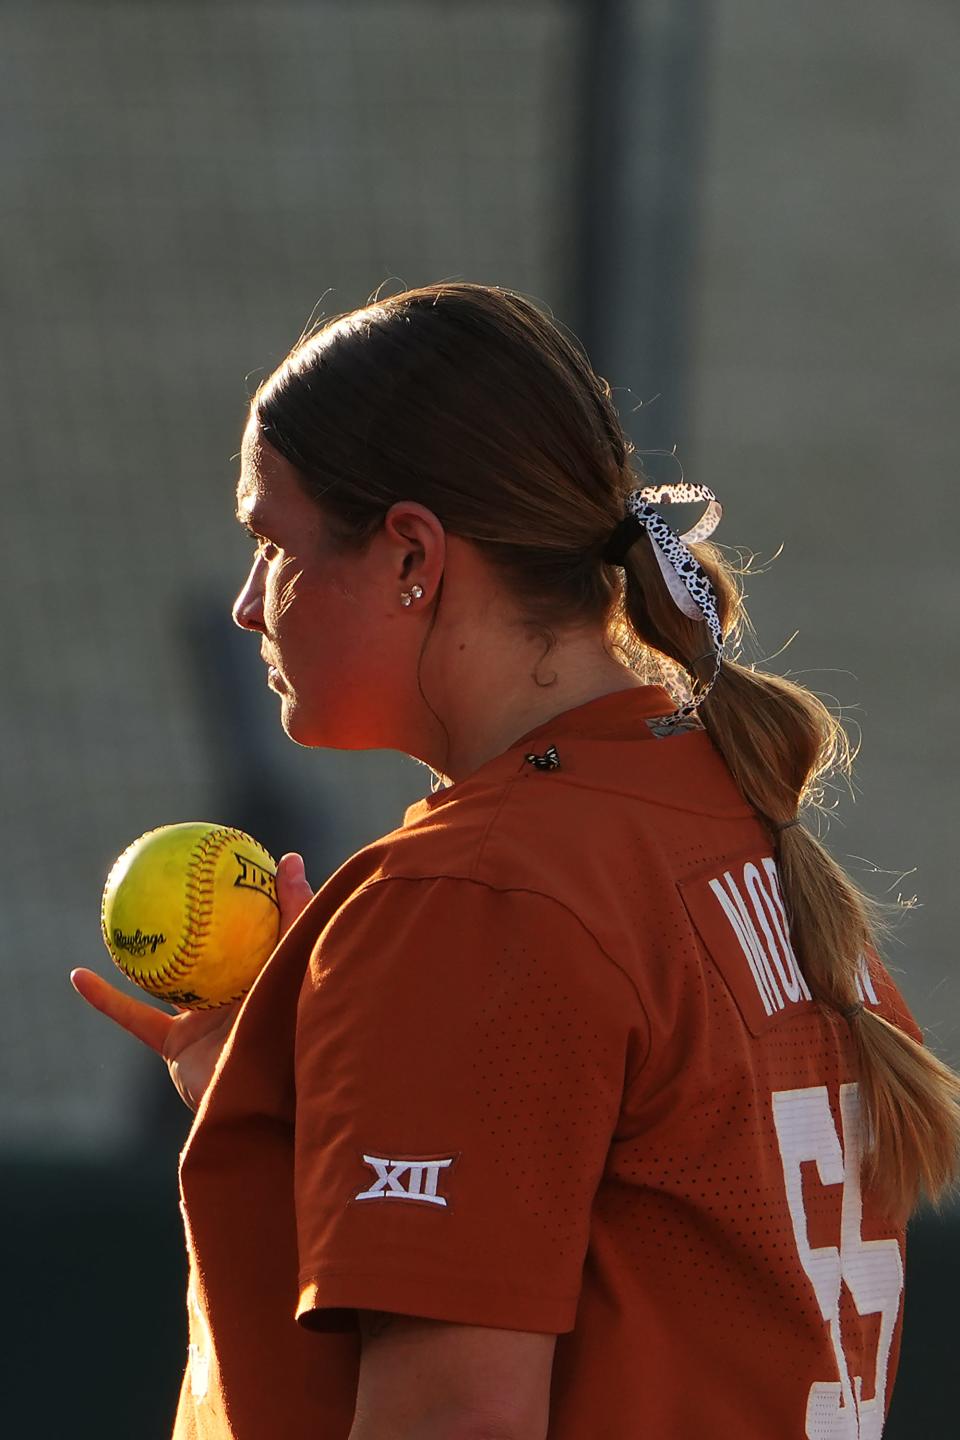 Texas' Mac Morgan threw a no-hitter as the Longhorns opened the NCAA Tournament with a 5-0 win over Siena Friday.